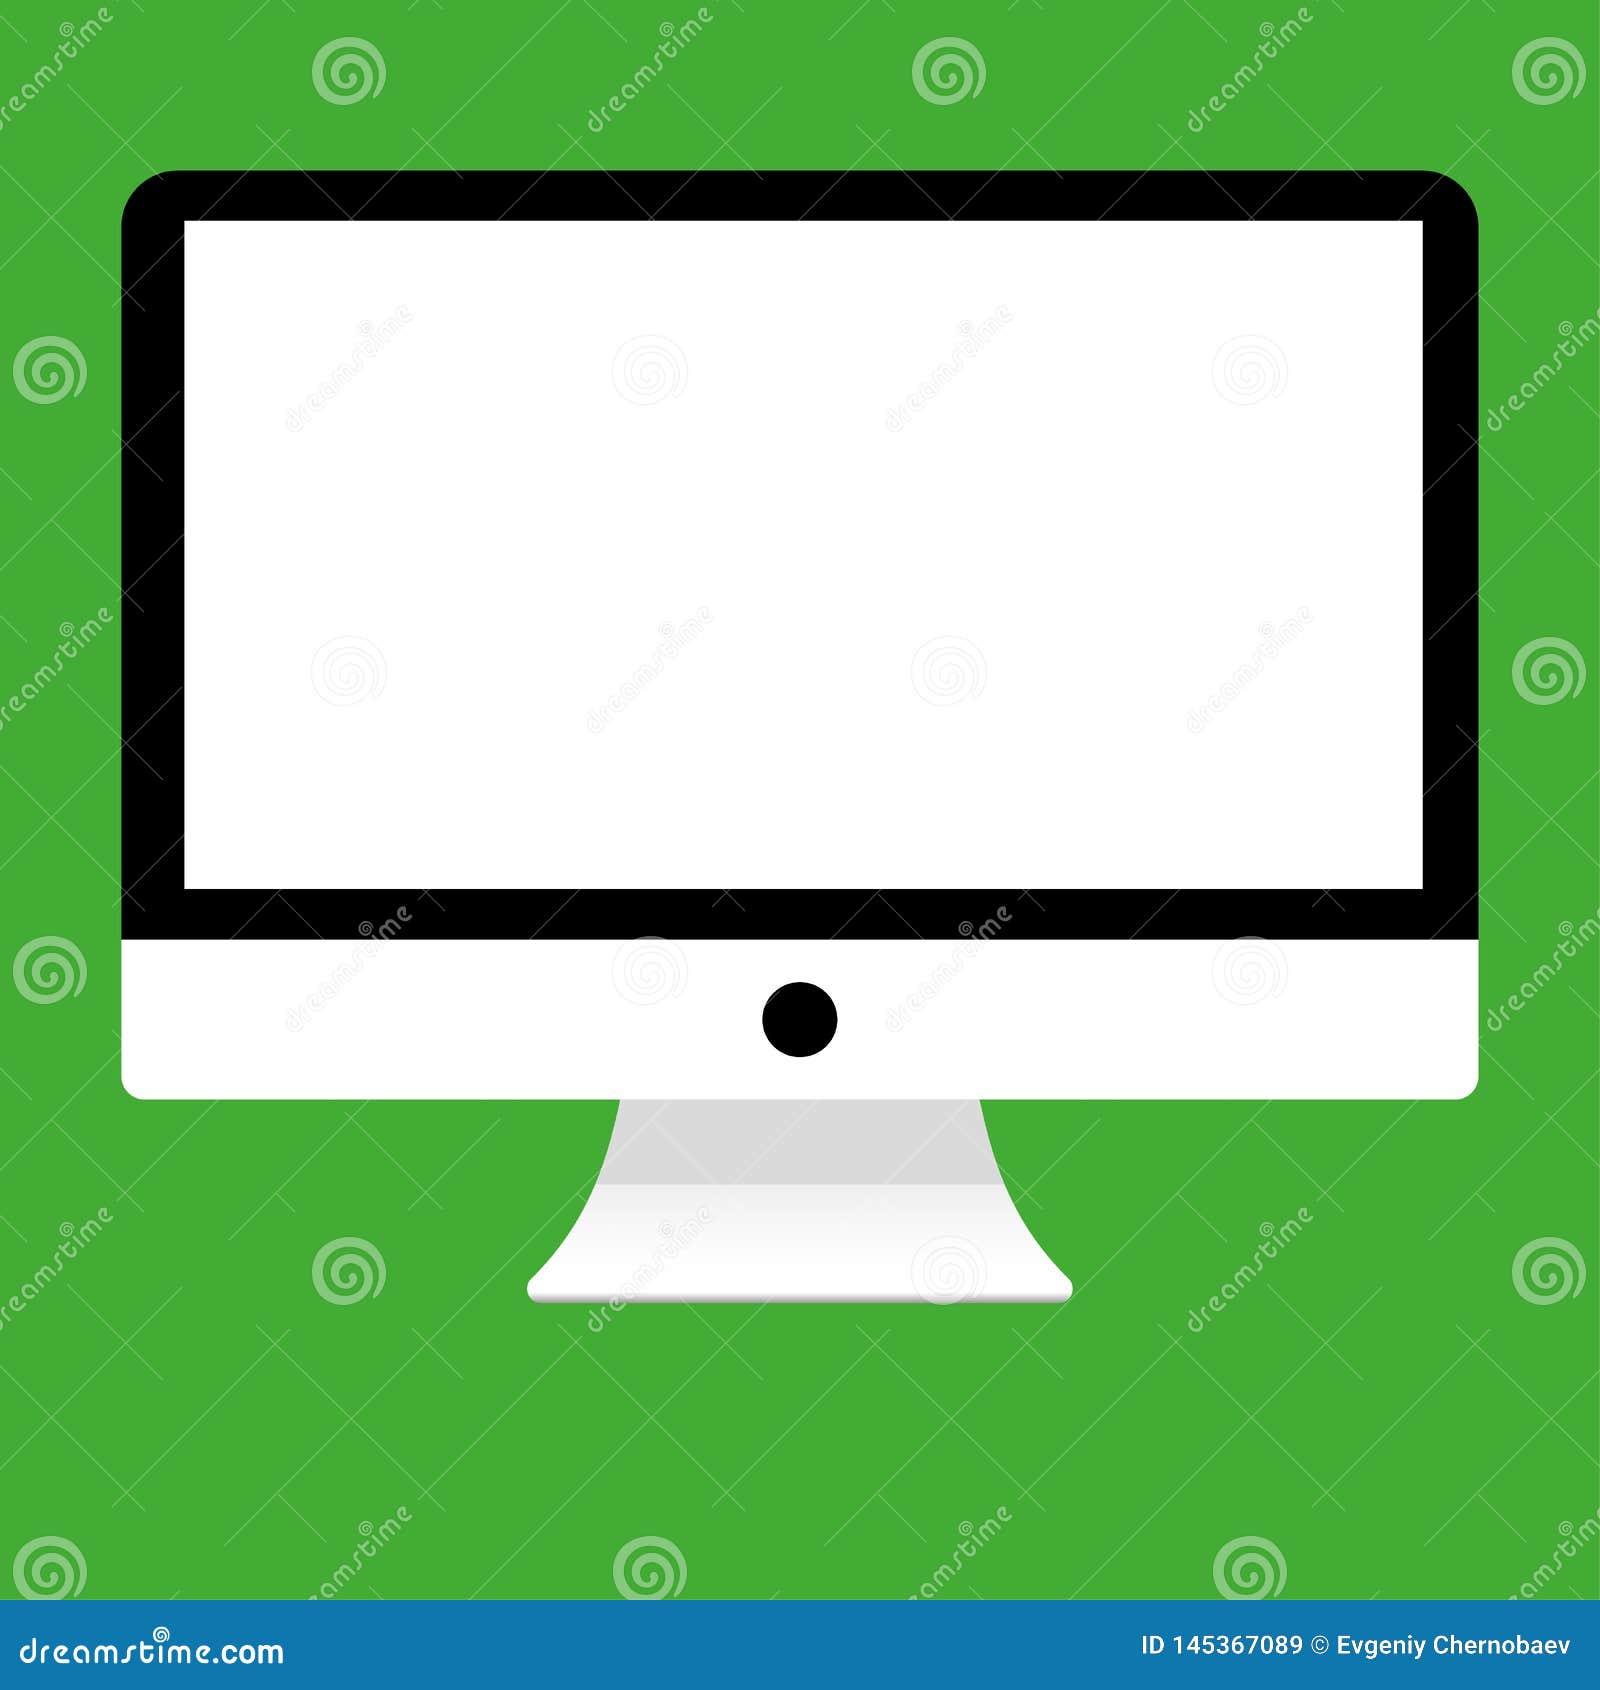 white and black imac computer with whitee empy screen front view on green background  eps10. desktop computer flat style.